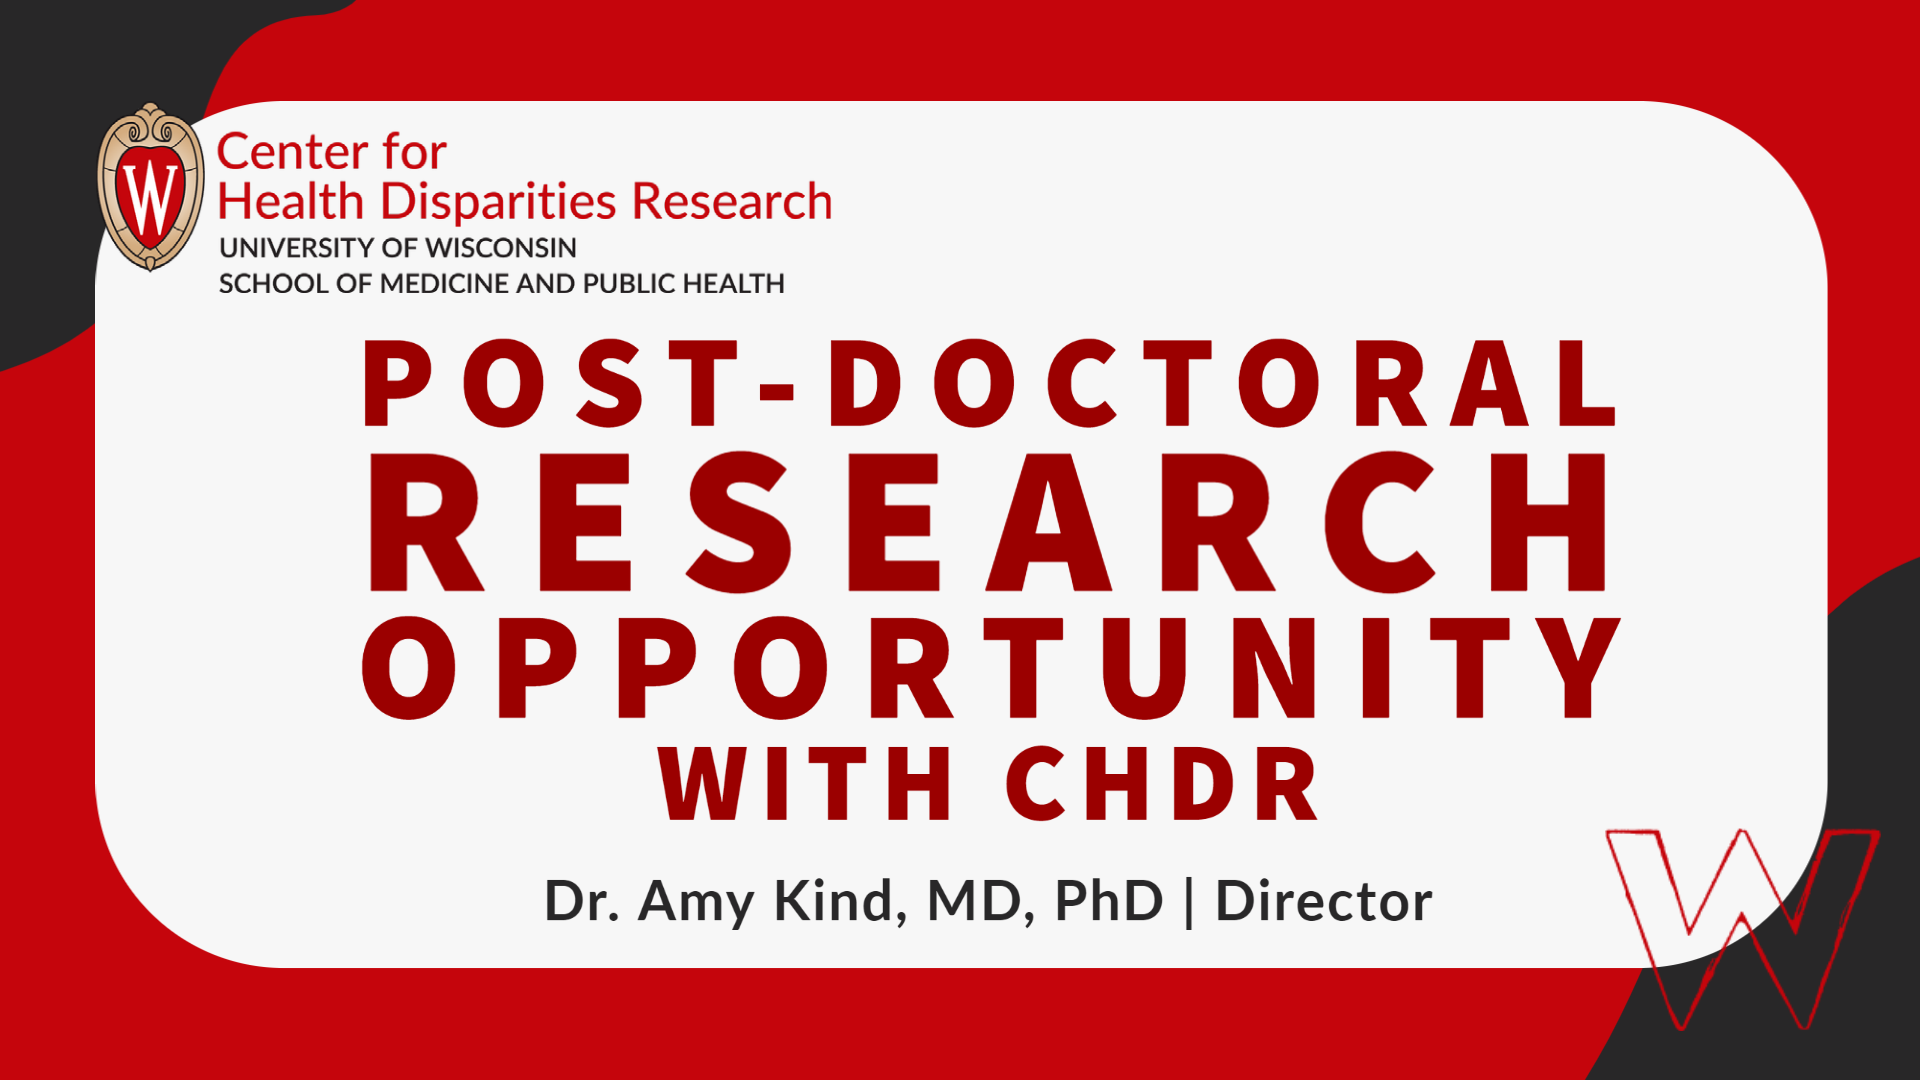 Black, red, and grey graphic with the Center for Health Disparities Research logo and a position announcement that reads, simply: "Post-doctoral research opportunity with CHDR, Dr. Amy Kind, PhD, MD, Director 